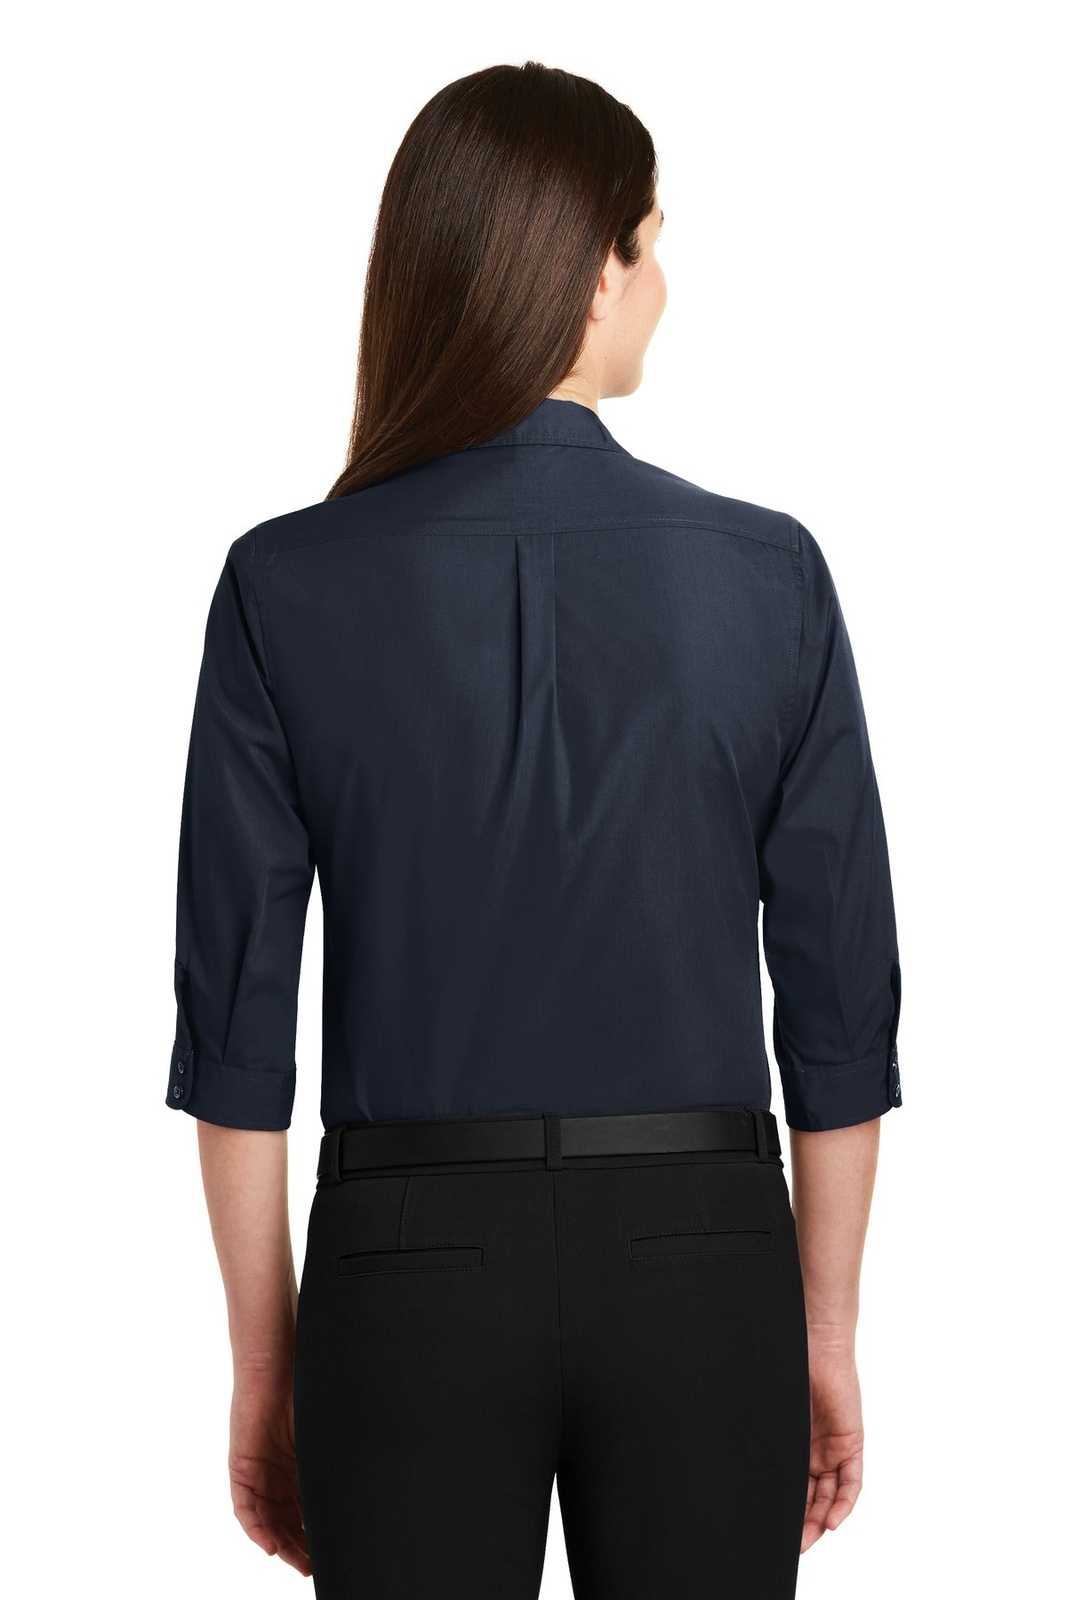 Port Authority LW102 Ladies 3/4-Sleeve Carefree Poplin Shirt - River Blue Navy - HIT a Double - 1